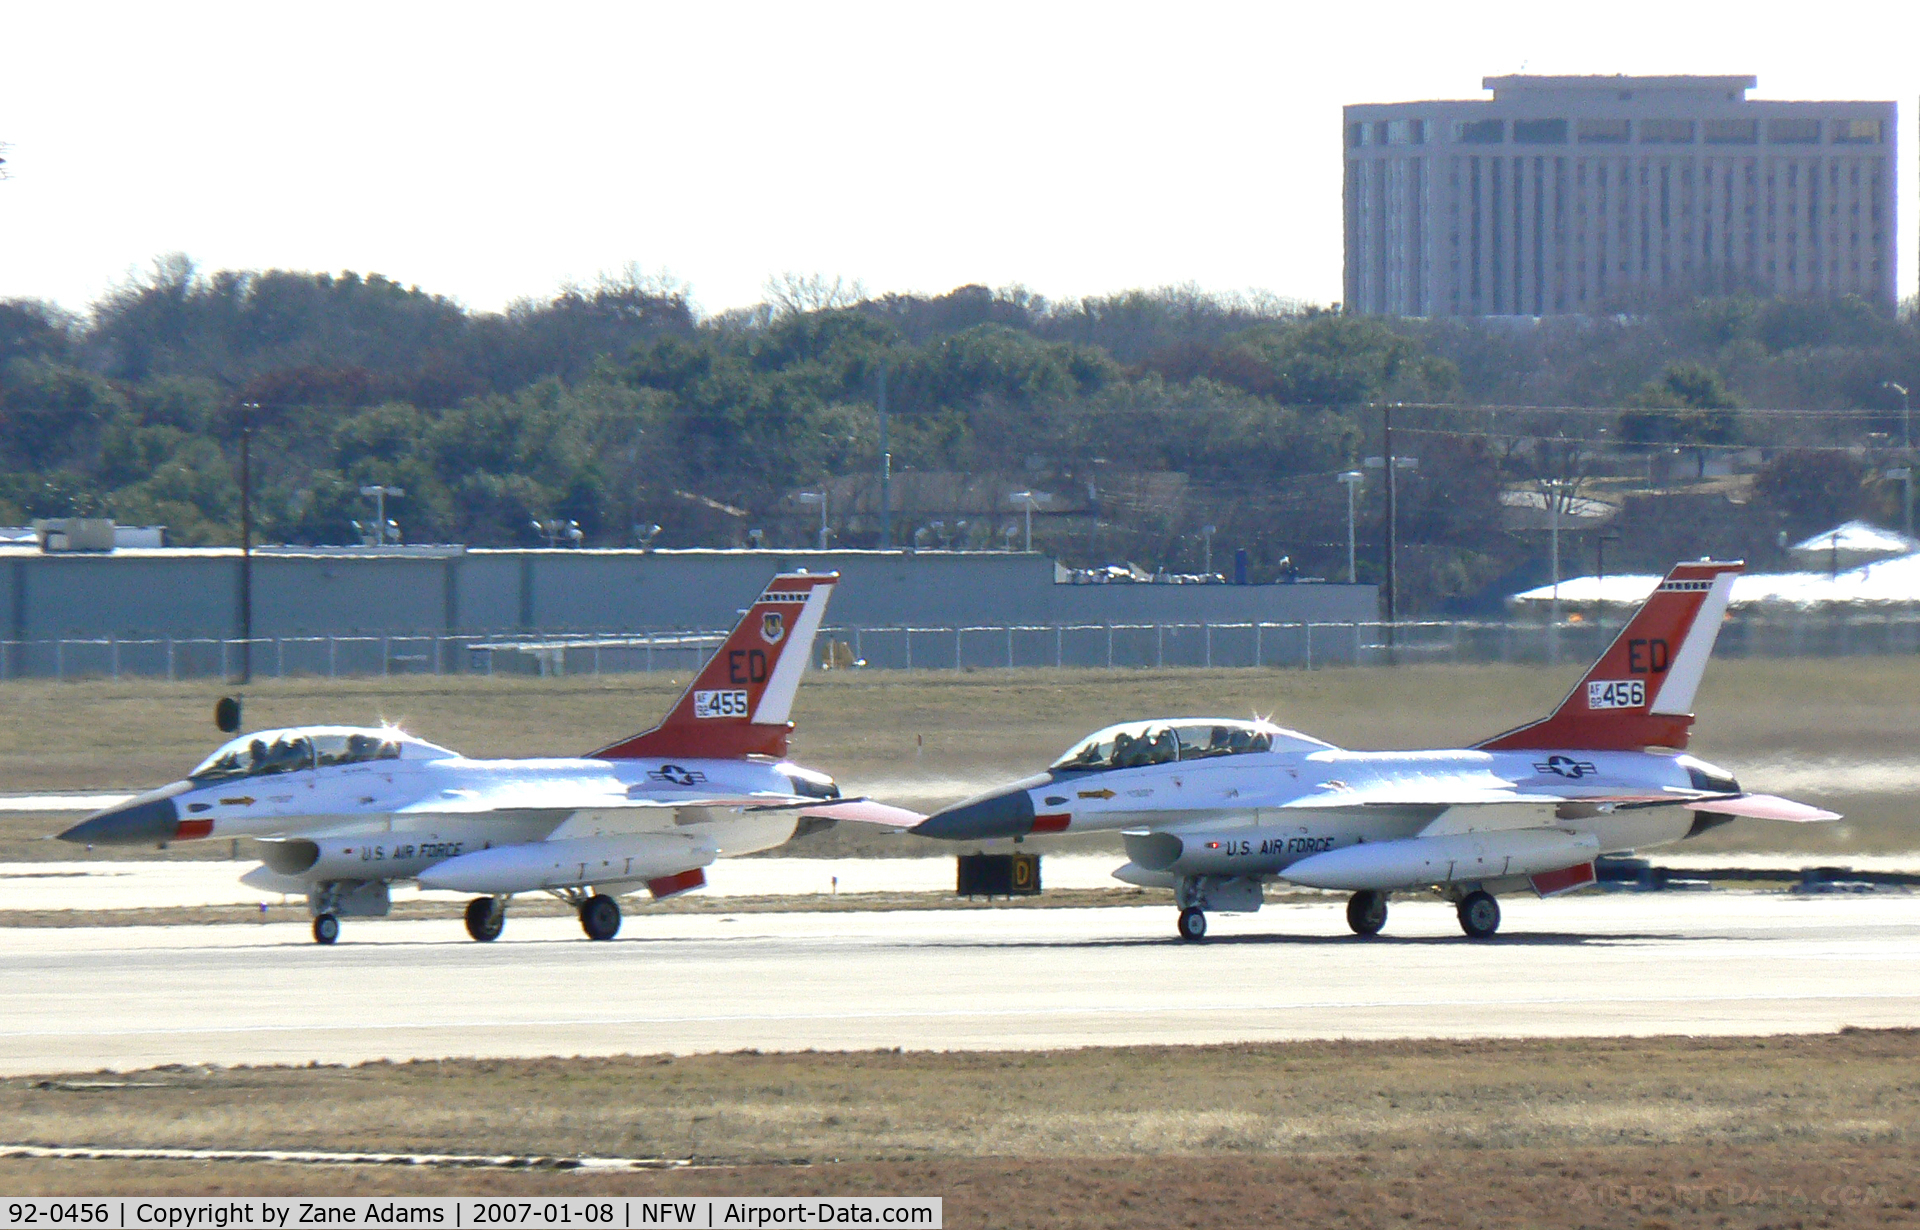 92-0456, 1992 Lockheed F-16B Fighting Falcon C/N DH-10, F-16 flight of two - Ready to launch!  456 on right